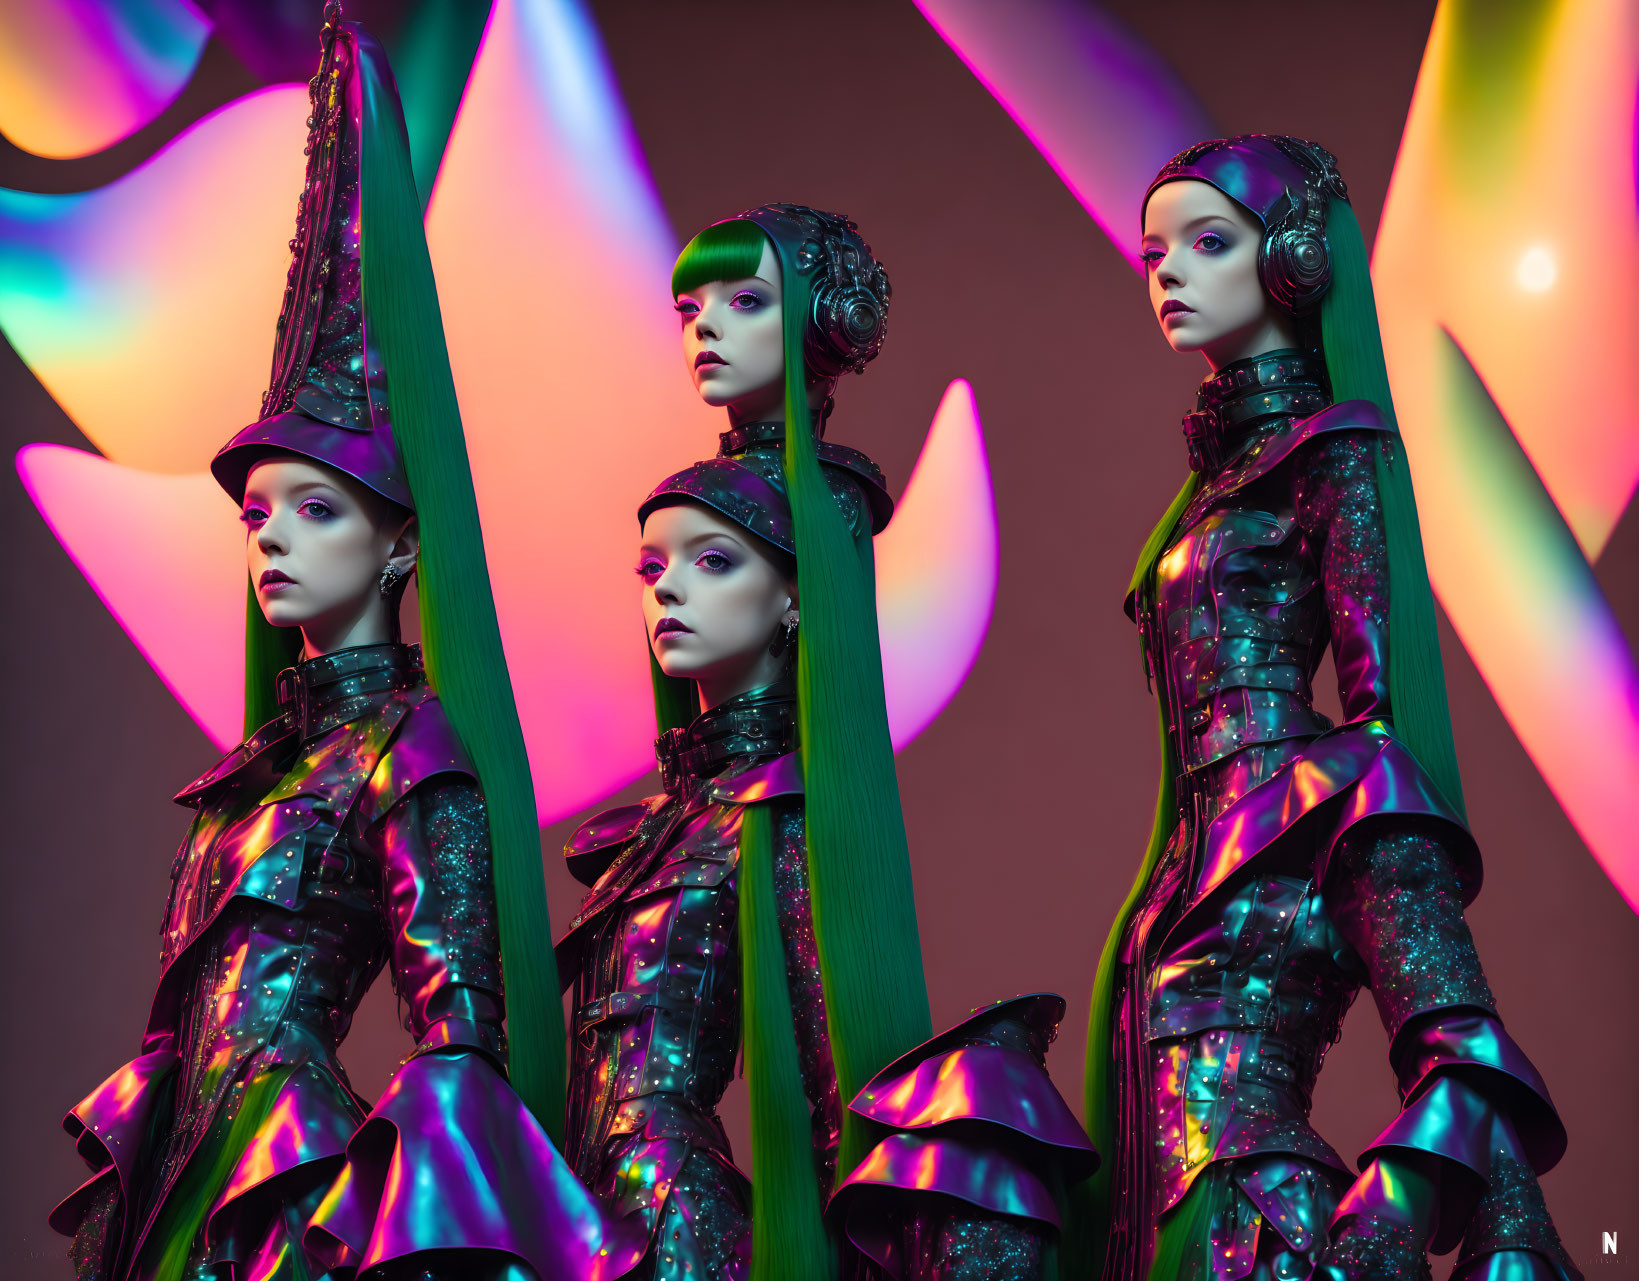 Futuristic models in metallic clothing and unique headpieces on dynamic colored background